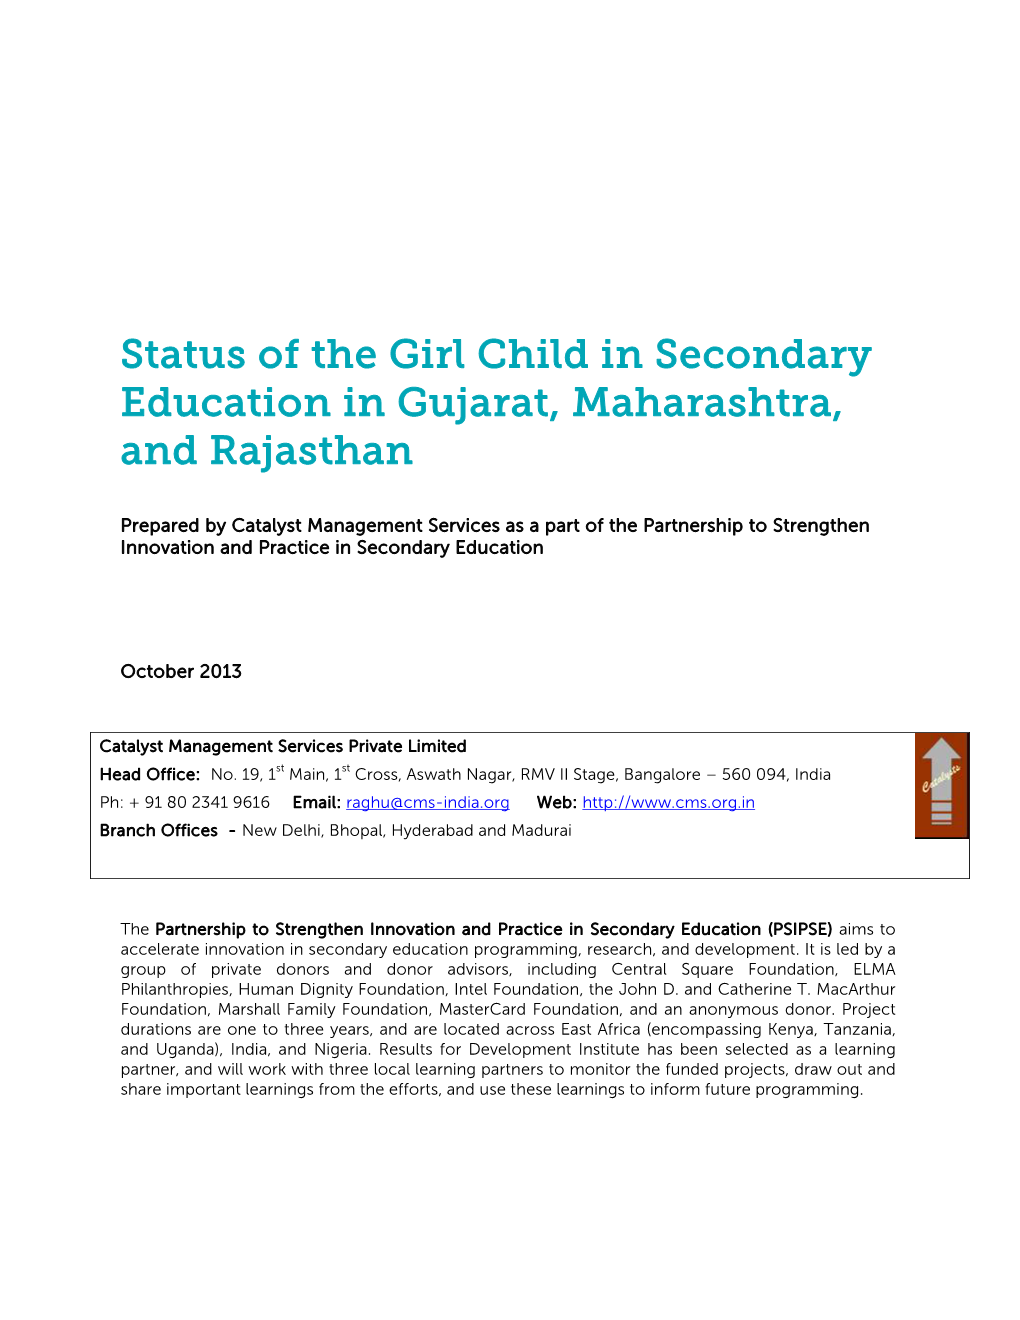 Status of the Girl Child in Secondary Education in Gujarat, Maharashtra, and Rajasthan